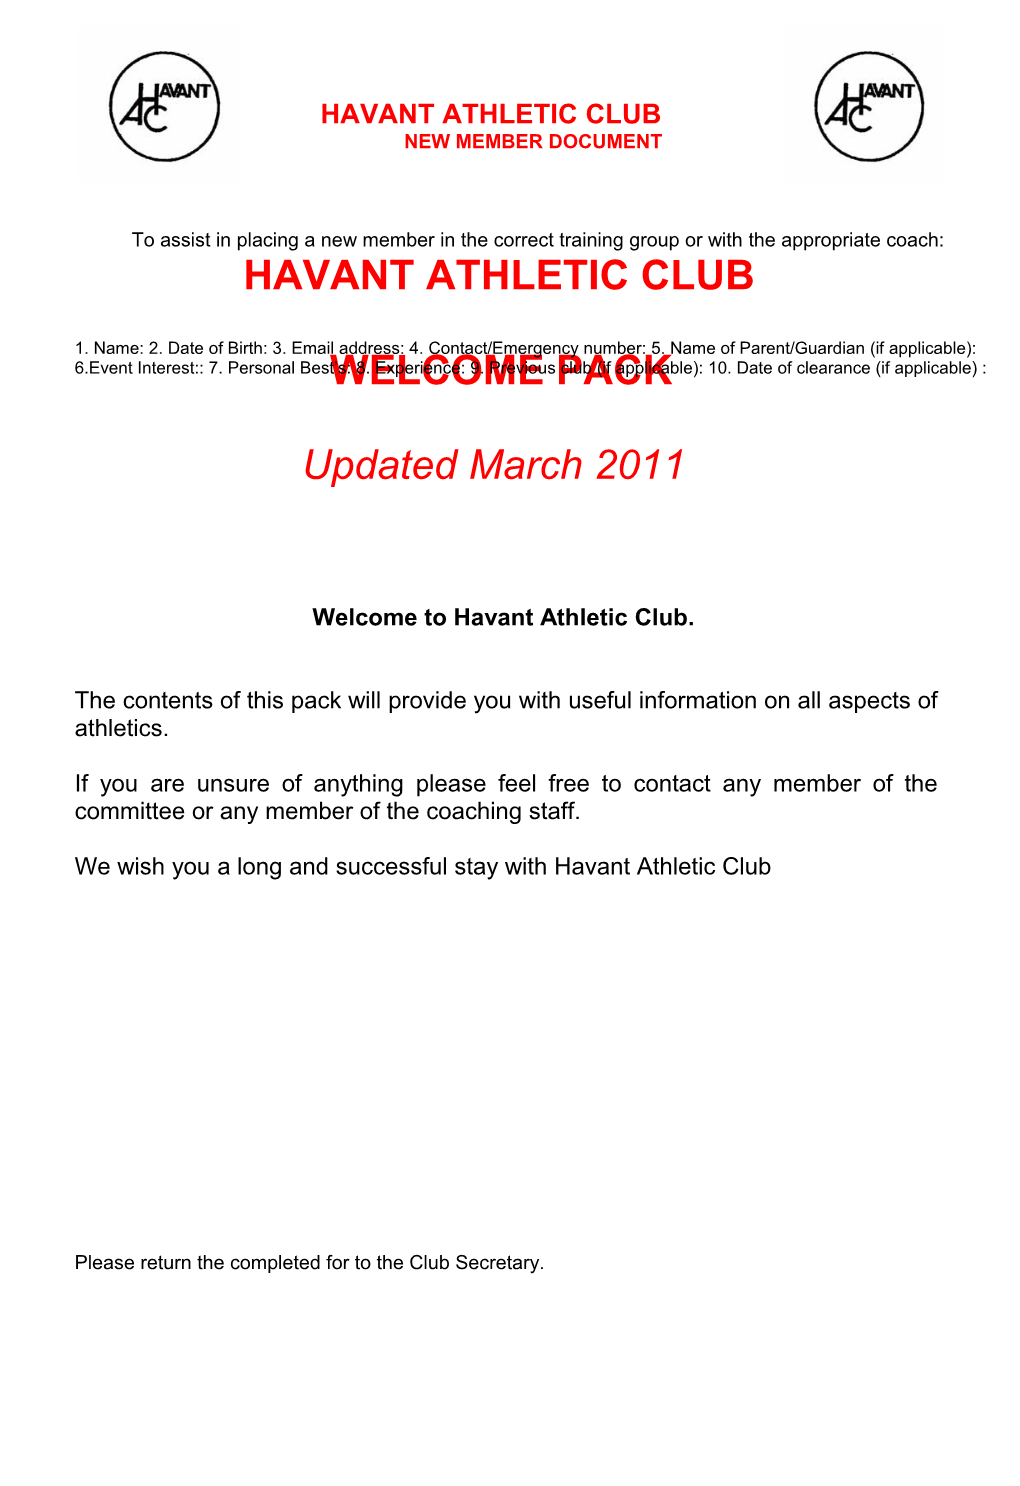 Welcome to Havant Athletic Club